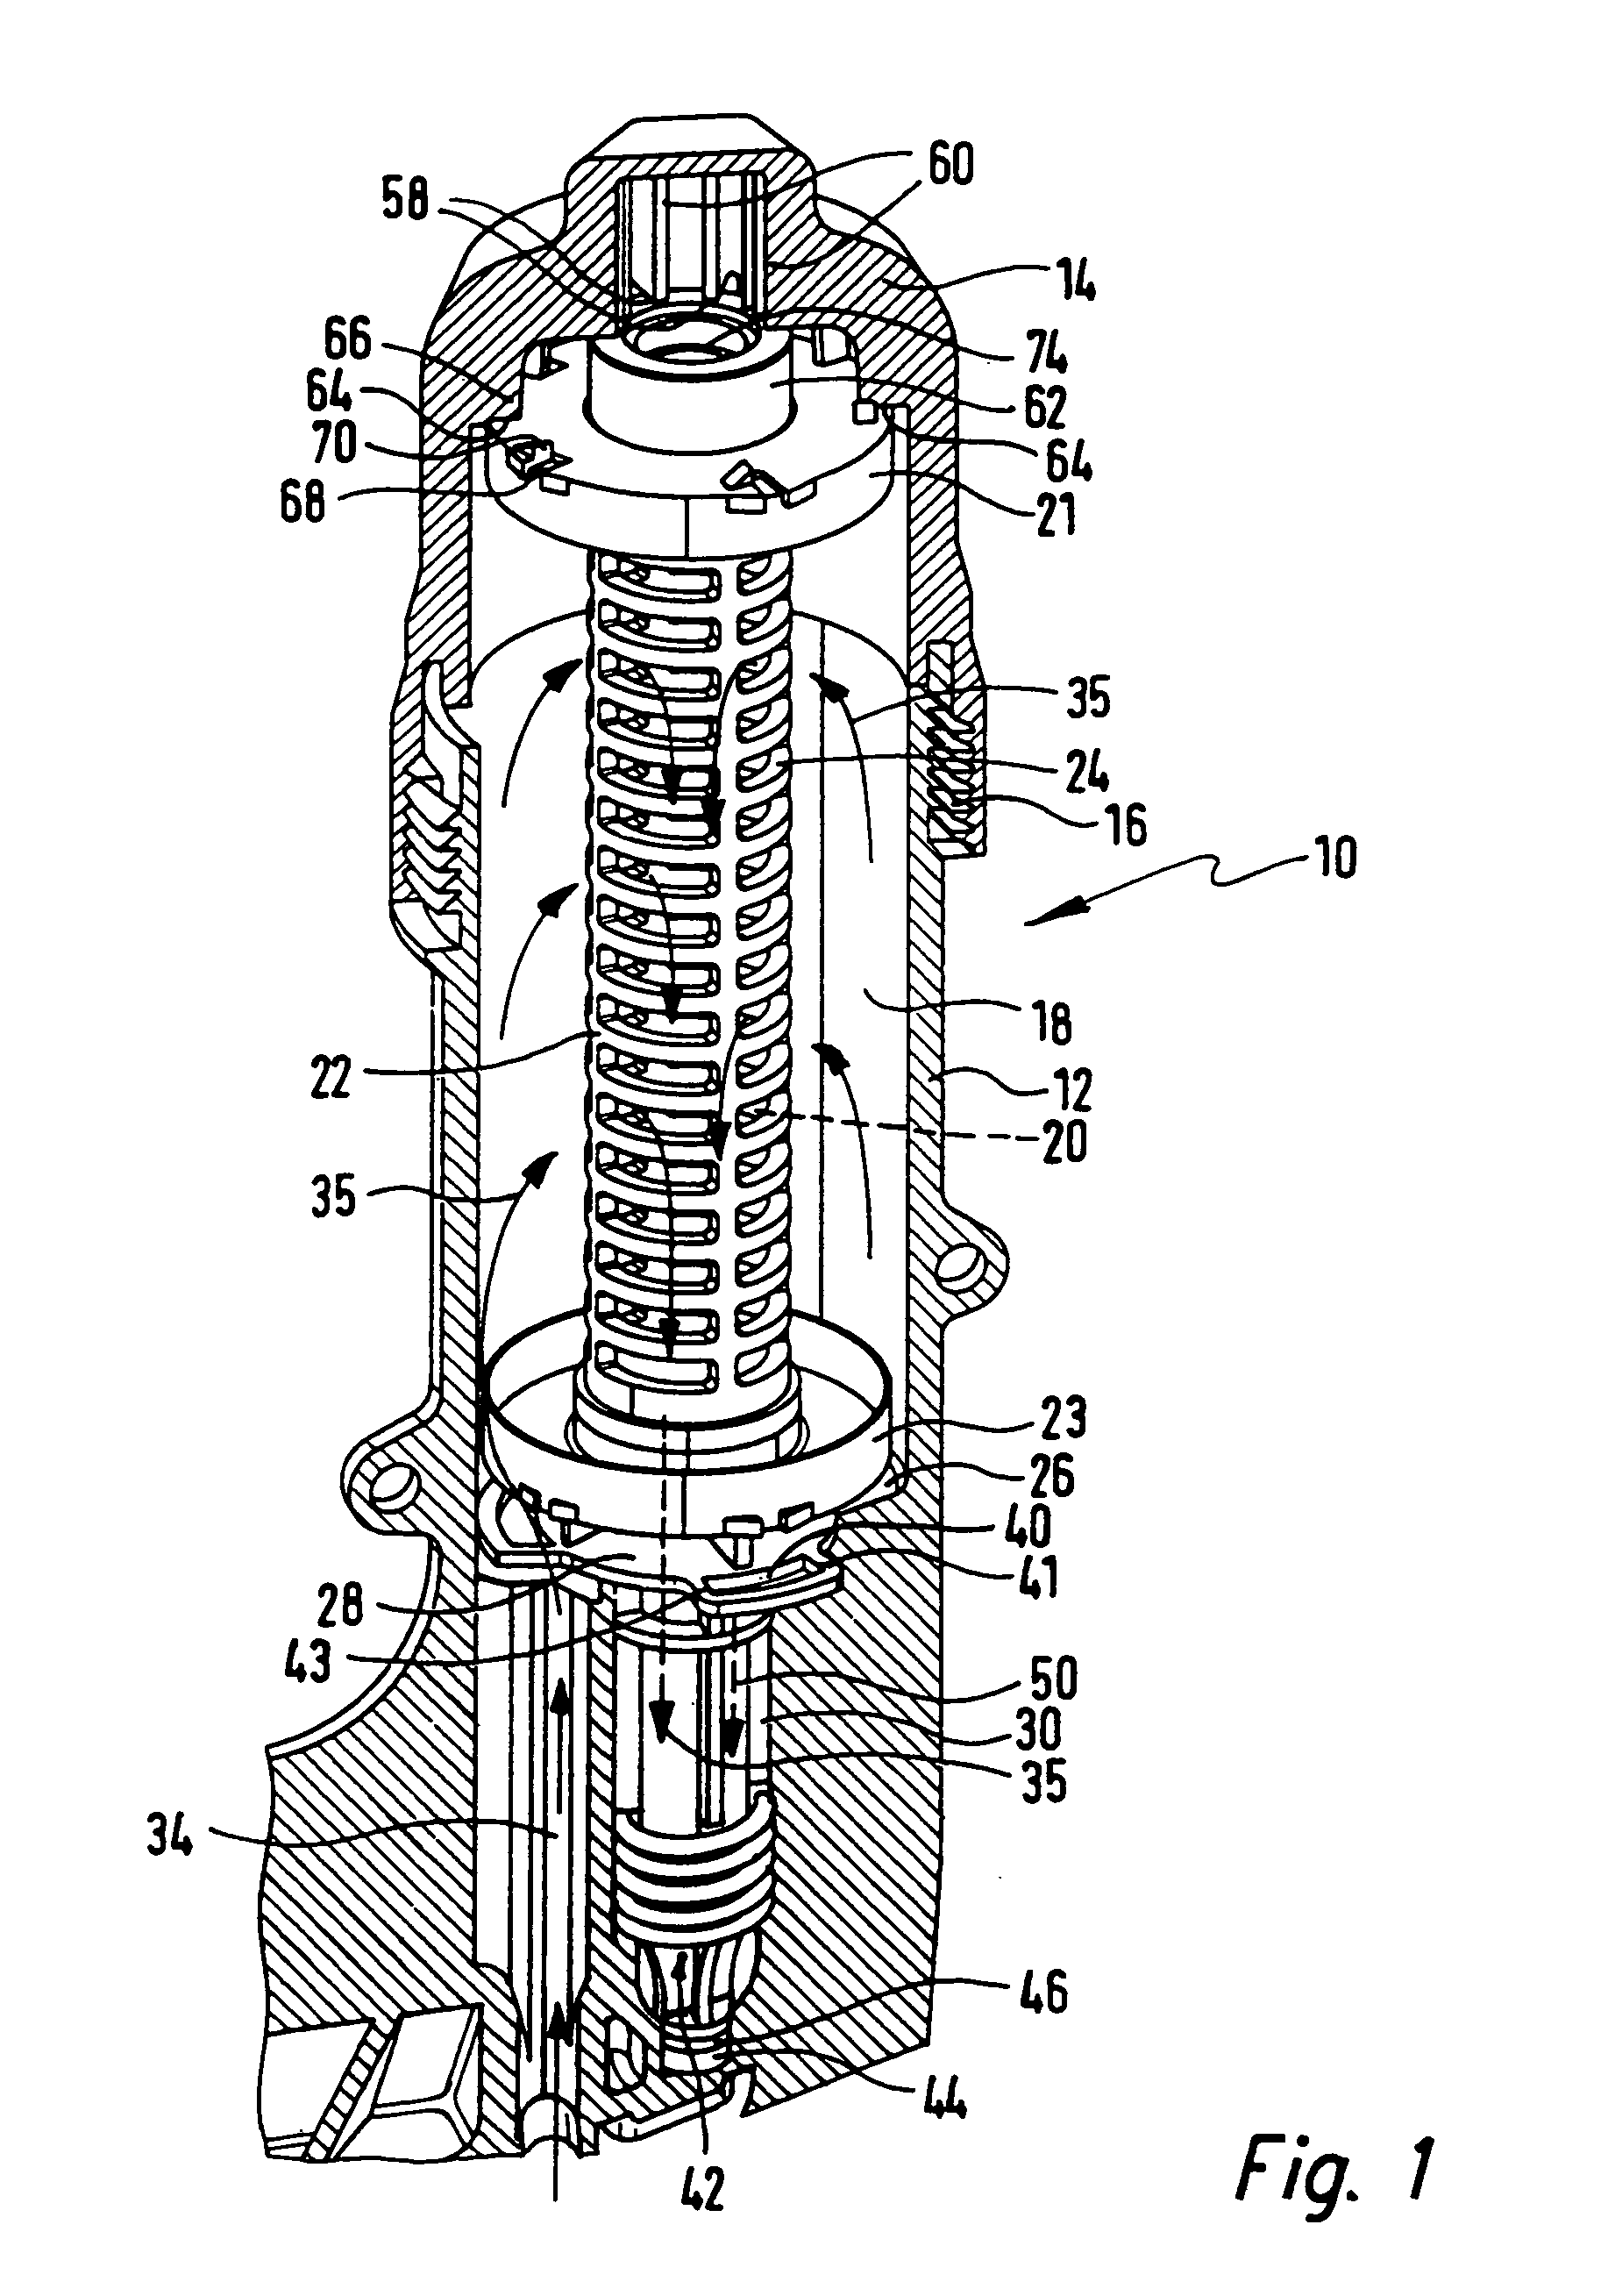 Oil filter assembly and associated filter element